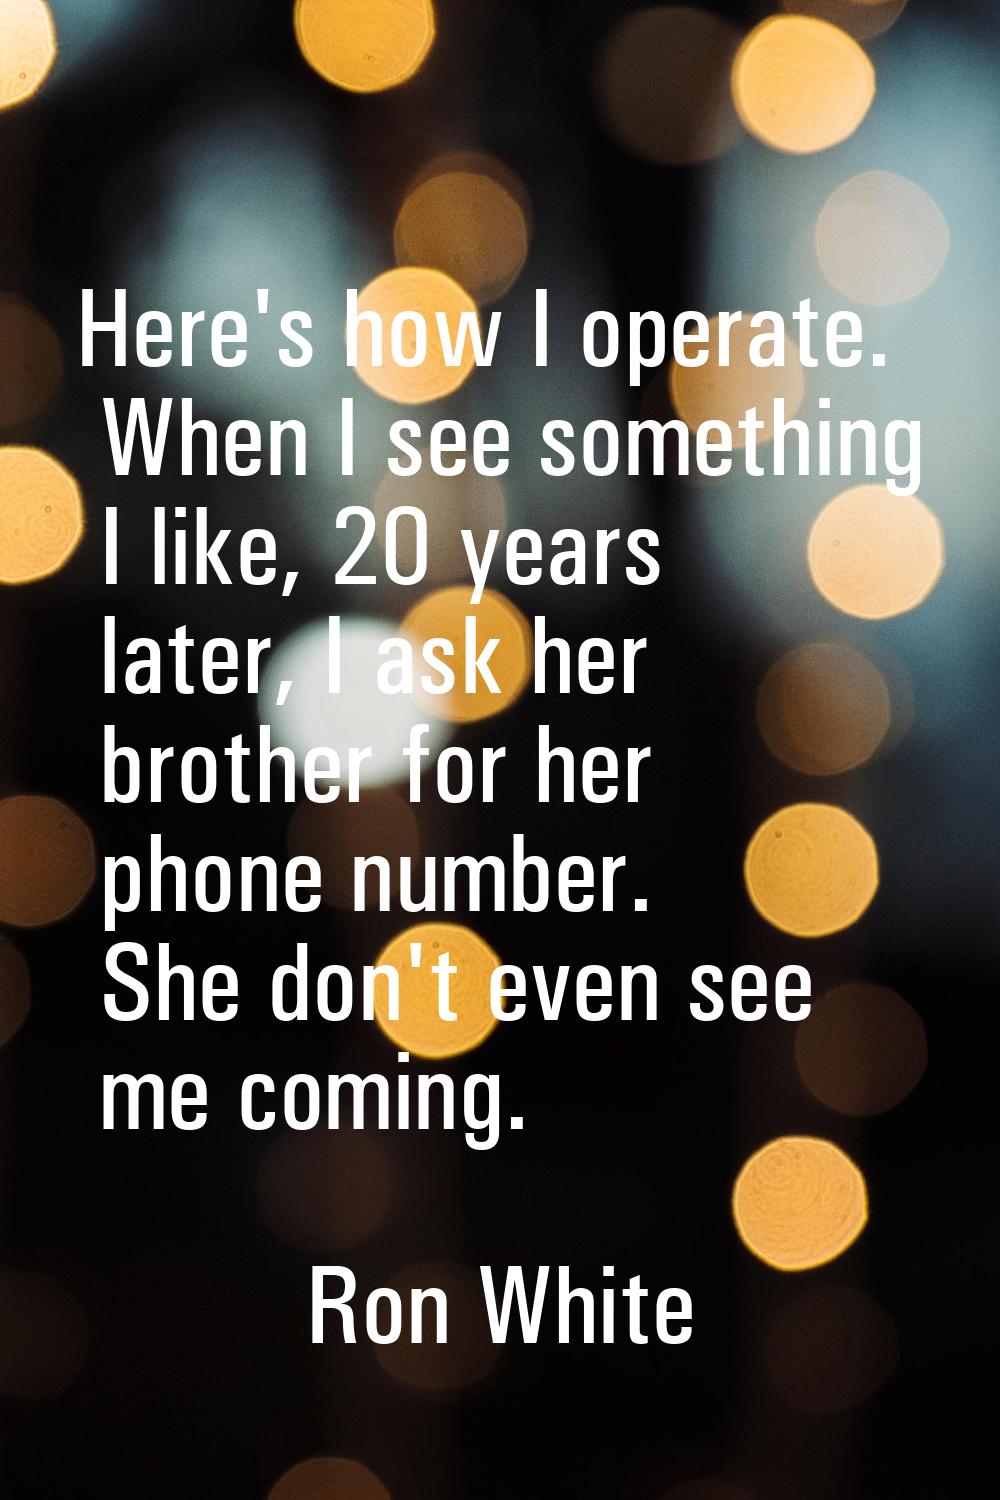 Here's how I operate. When I see something I like, 20 years later, I ask her brother for her phone 